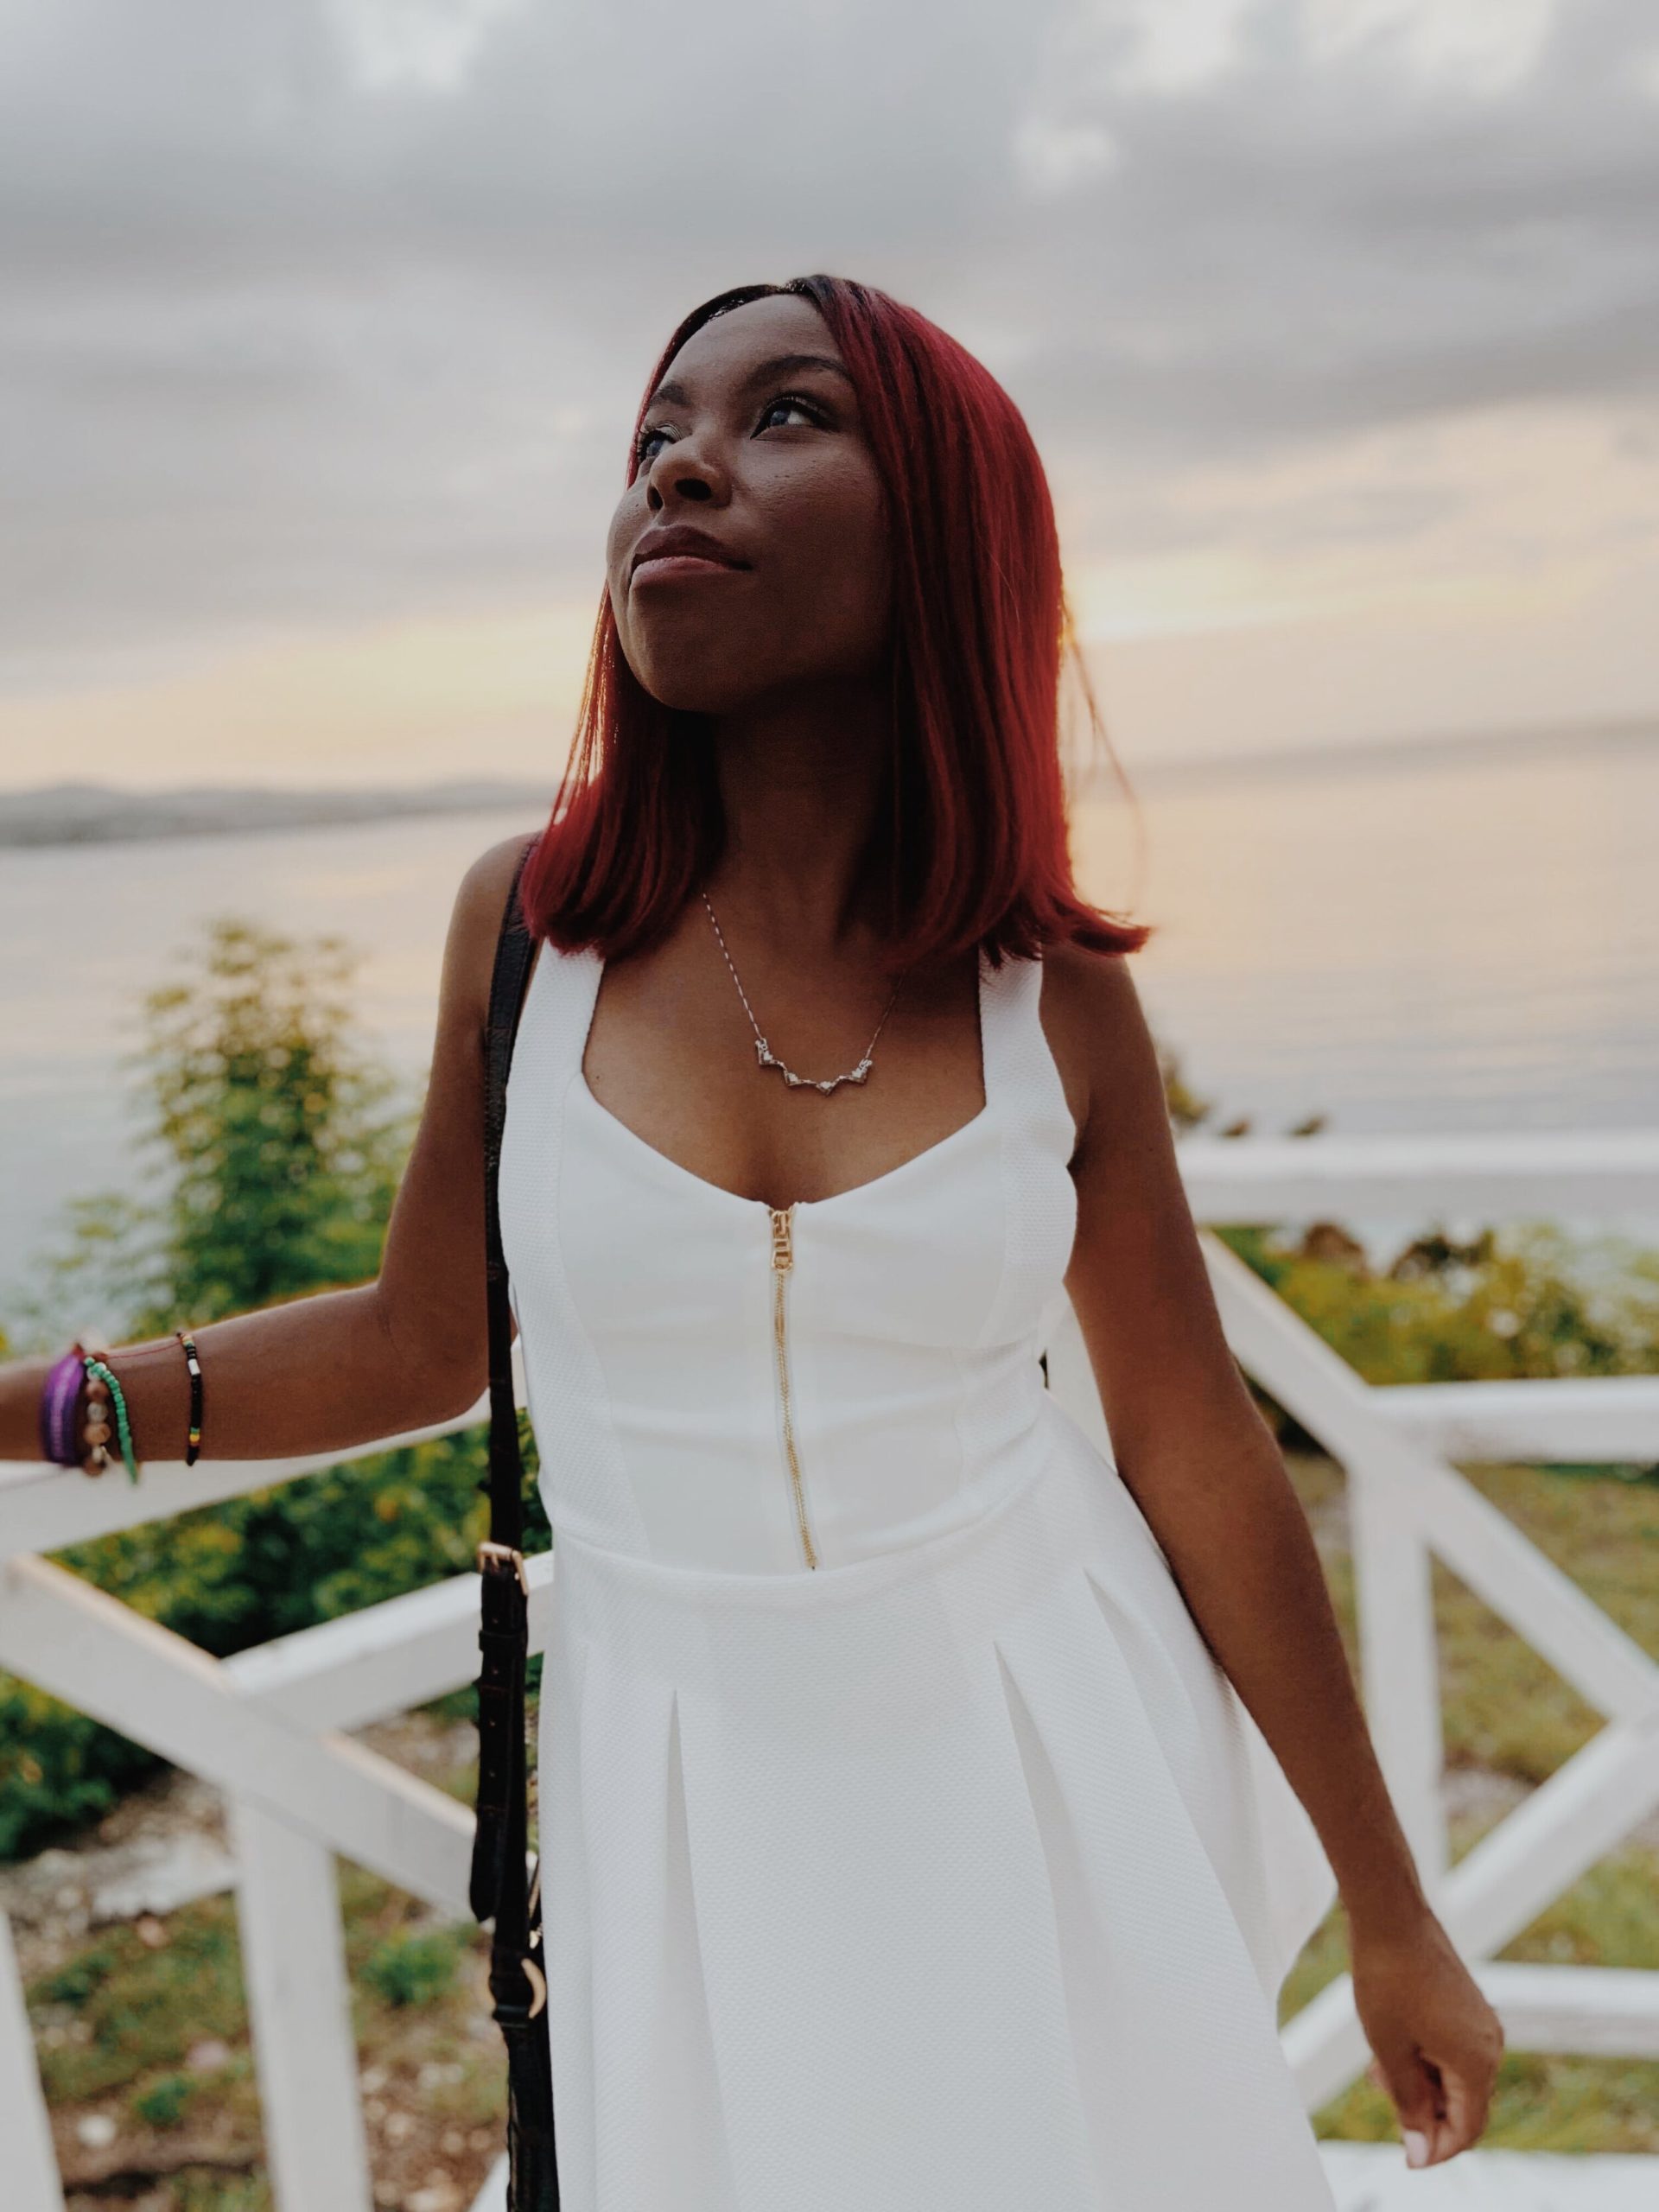 Lucea, Jamaica; August 2019 - Being a fairy princess for the ‘gram during my family’s reunion     A little about Shaneez:  Shaneez is a storyteller passionate about identity and representation in the media. She previously worked with PRX’s training team helping NPR stations and independent, international producers develop podcasting and entrepreneurial skills. She loves a good dad joke, collecting postcards from every city she visits, and is most likely to be found jamming to an old school bop.